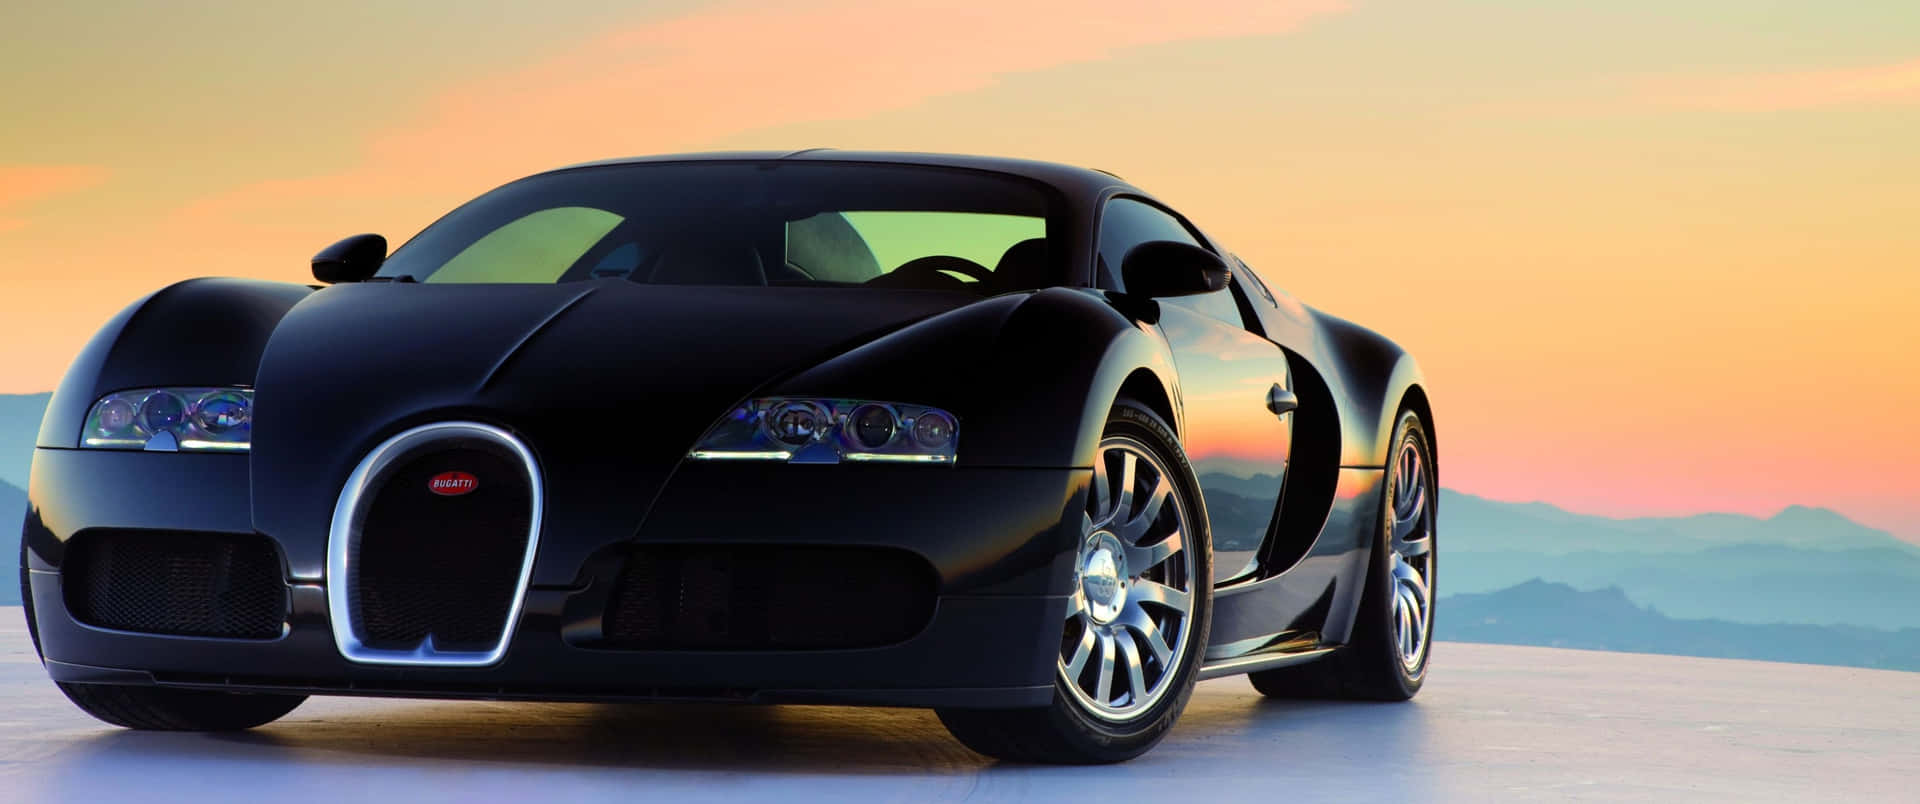 Experience unmatched luxury and power with the Bugatti hypercar.